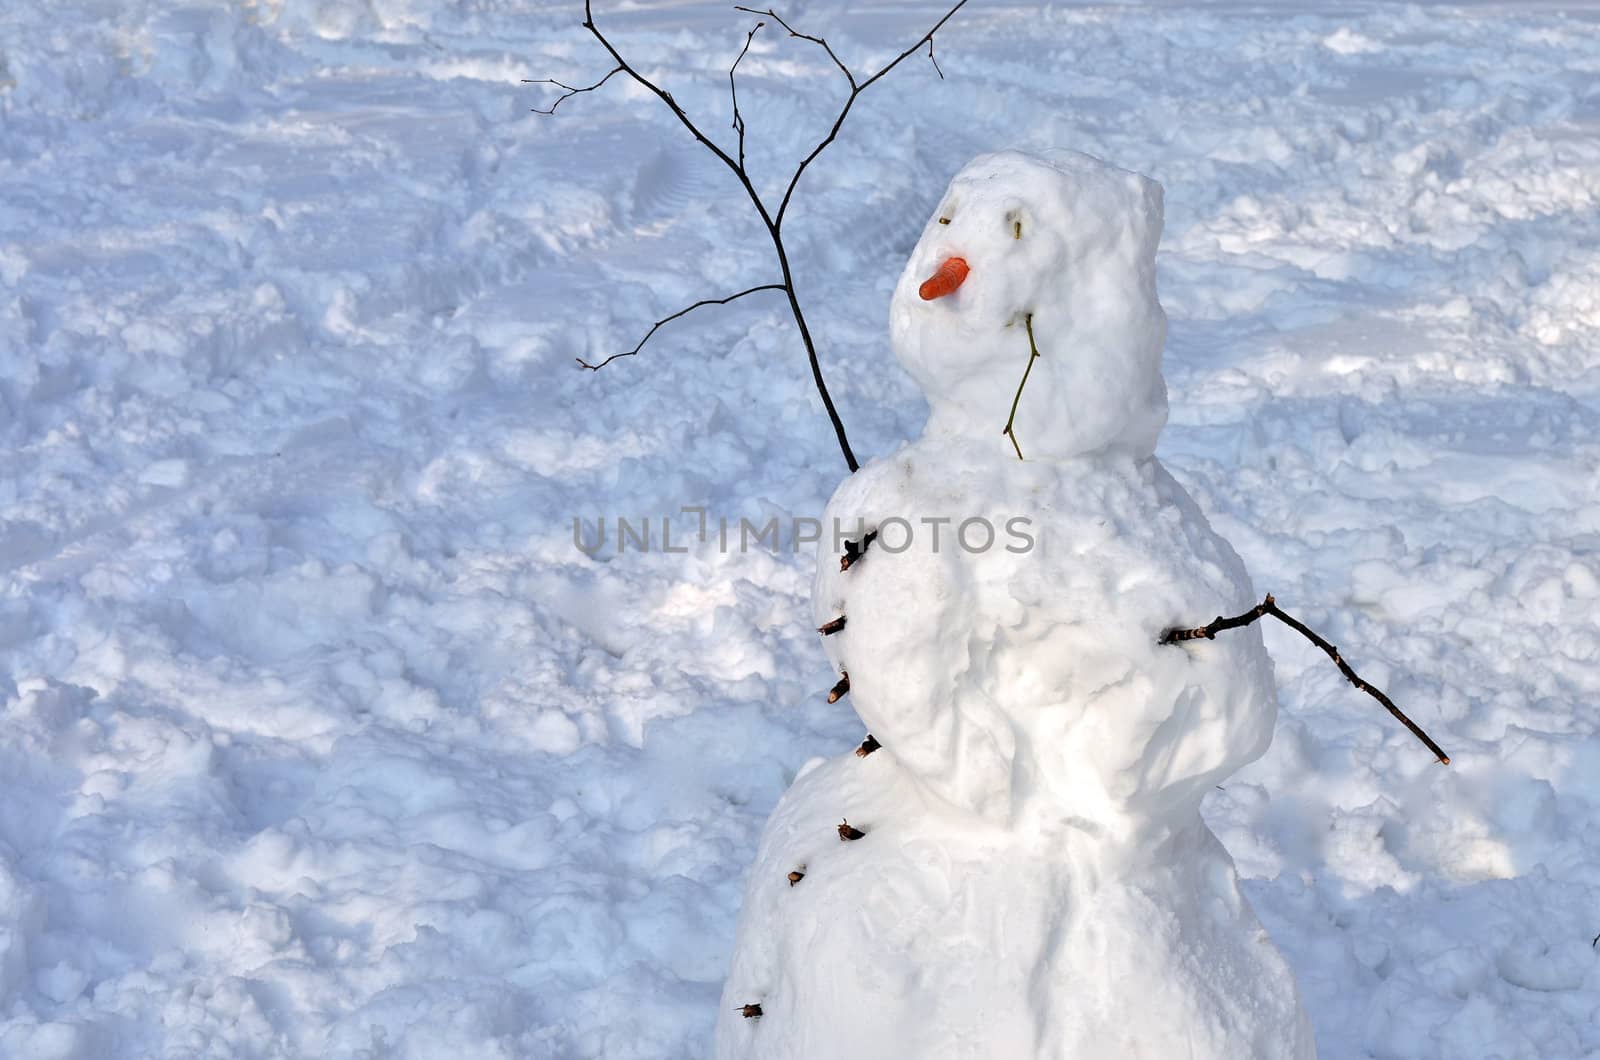 Snowman made by kids standing in the park on snowy field.